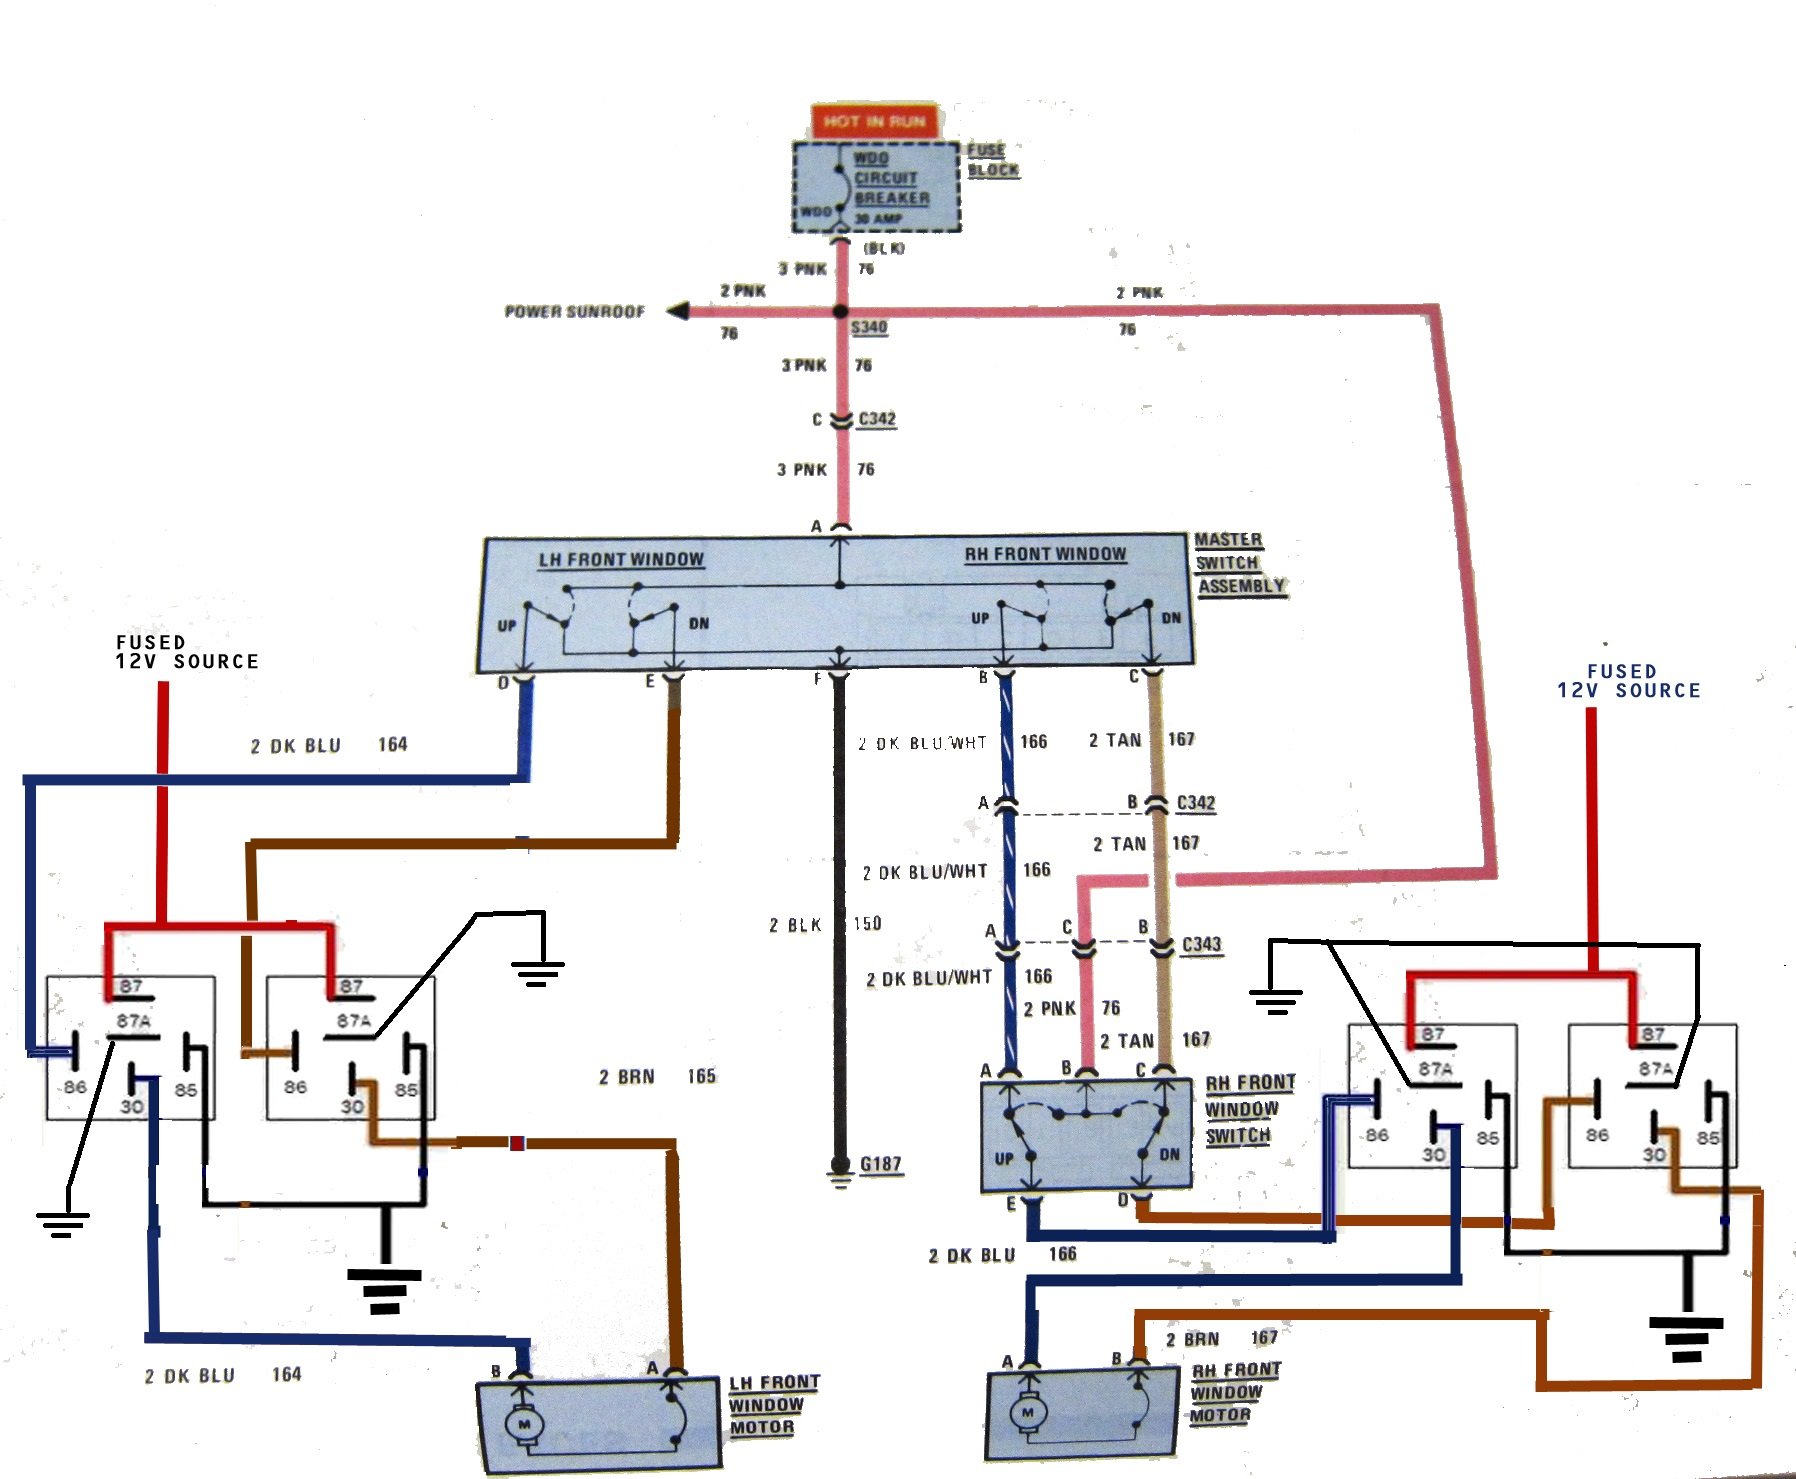 Power Window Wiring Diagram Adding Relays To Speed Up The